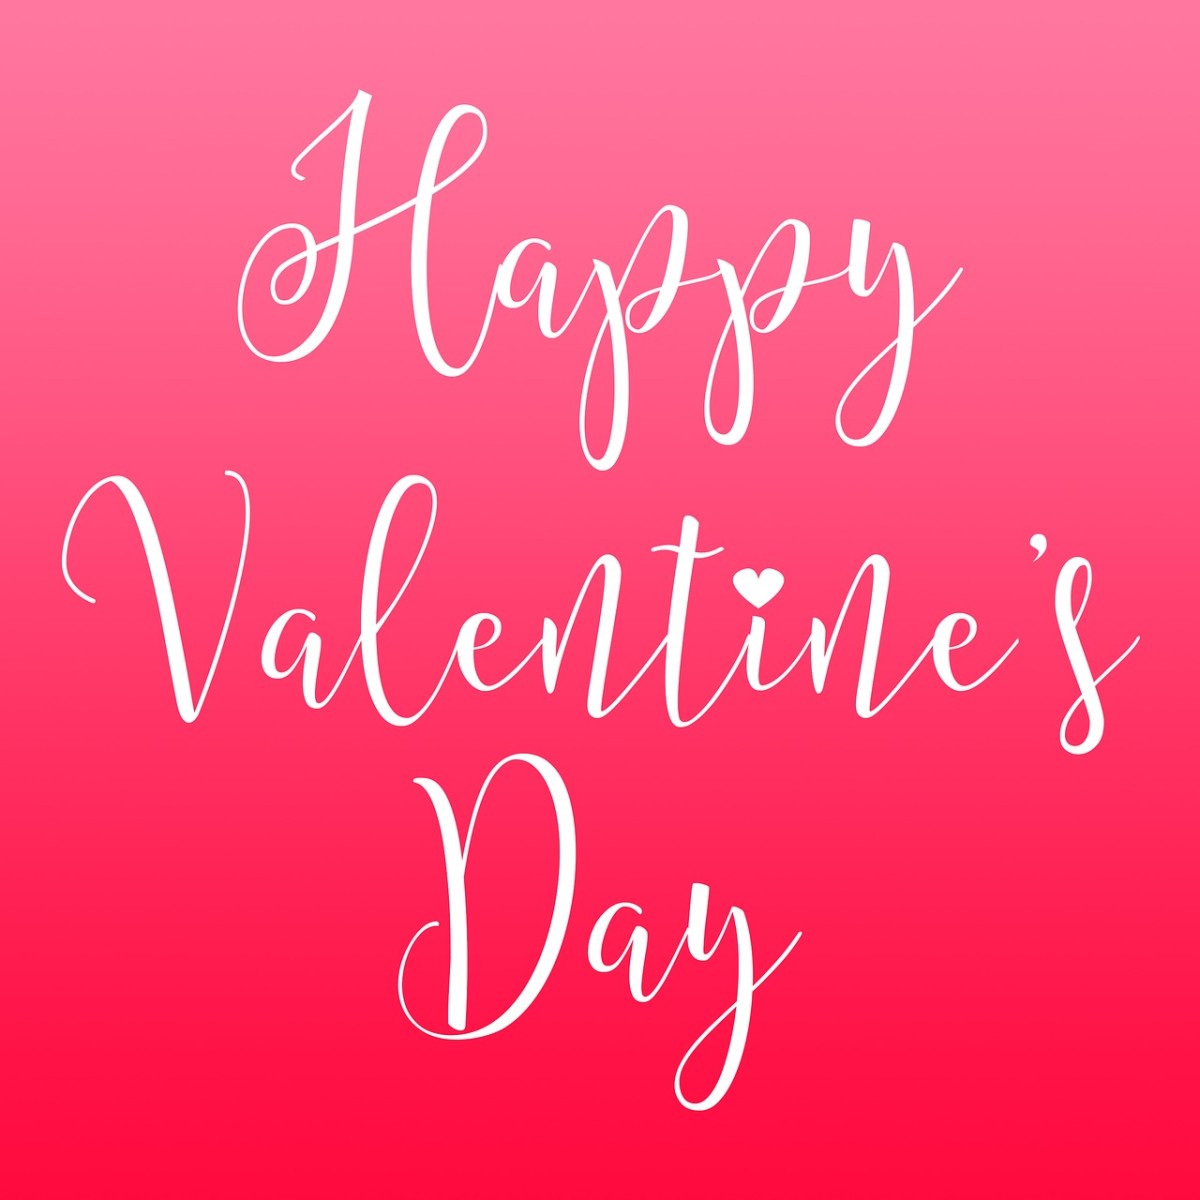 Here are a few tips for celebrating Valentine's Day!